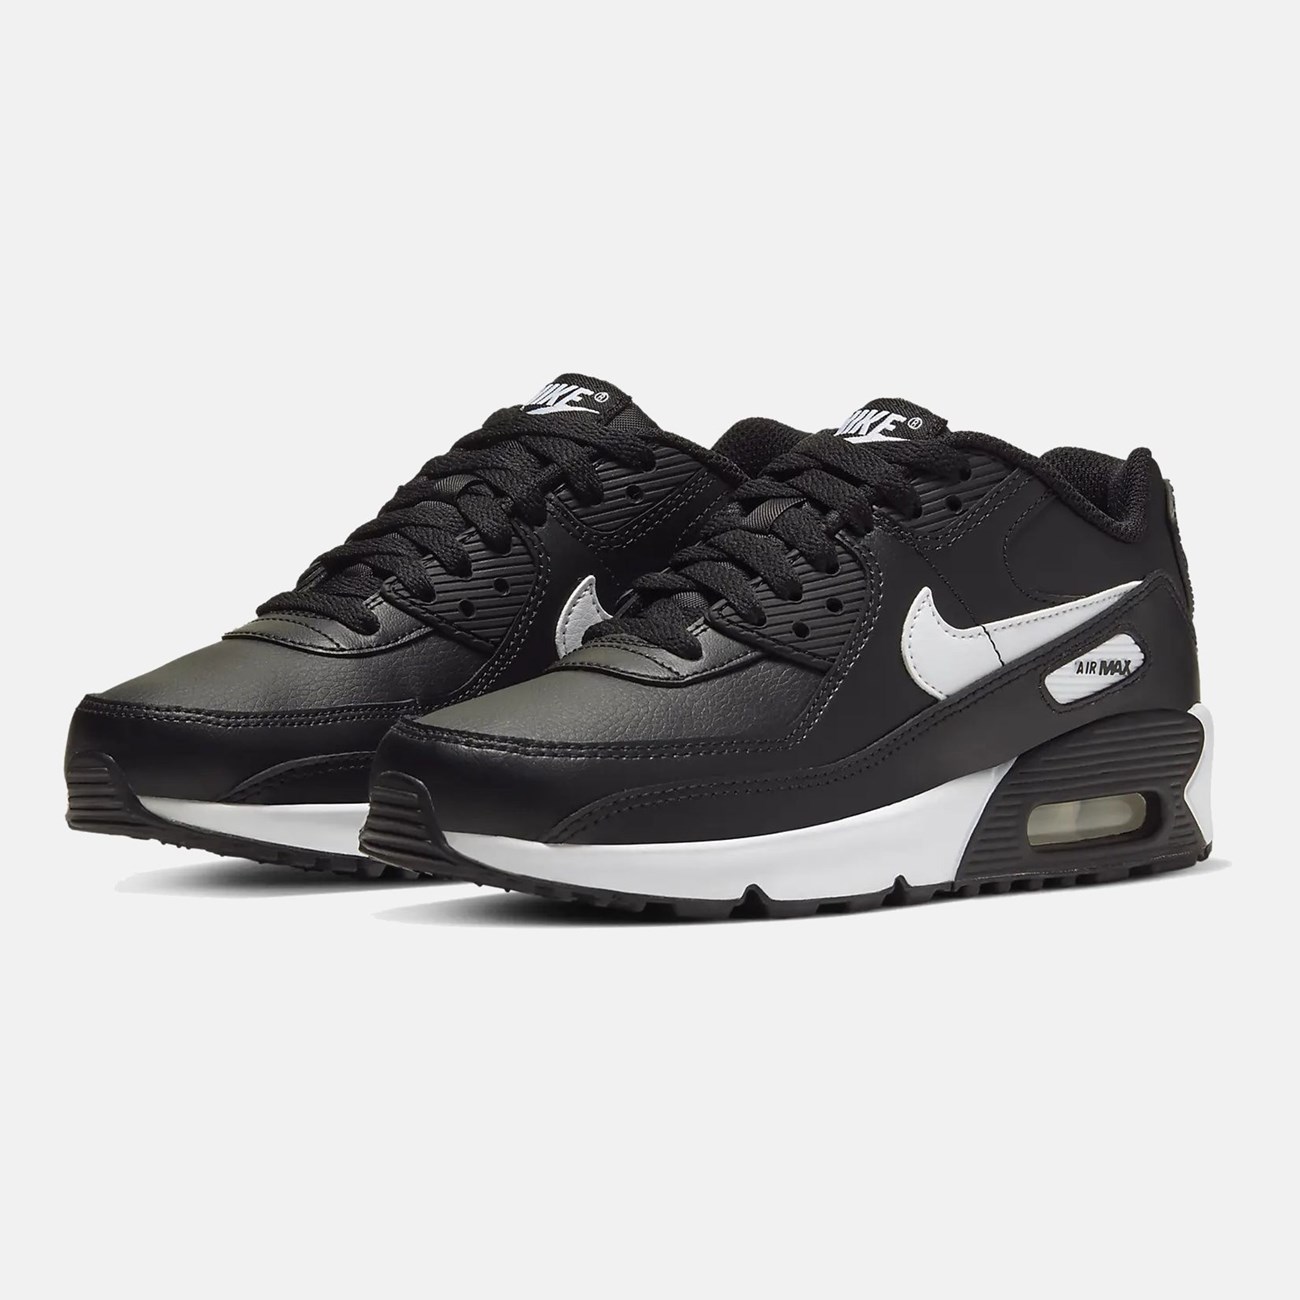 NIKE Παιδικά Sneakers Air Max 90 LTR (GS) CD6864-010 - The Athlete's Foot